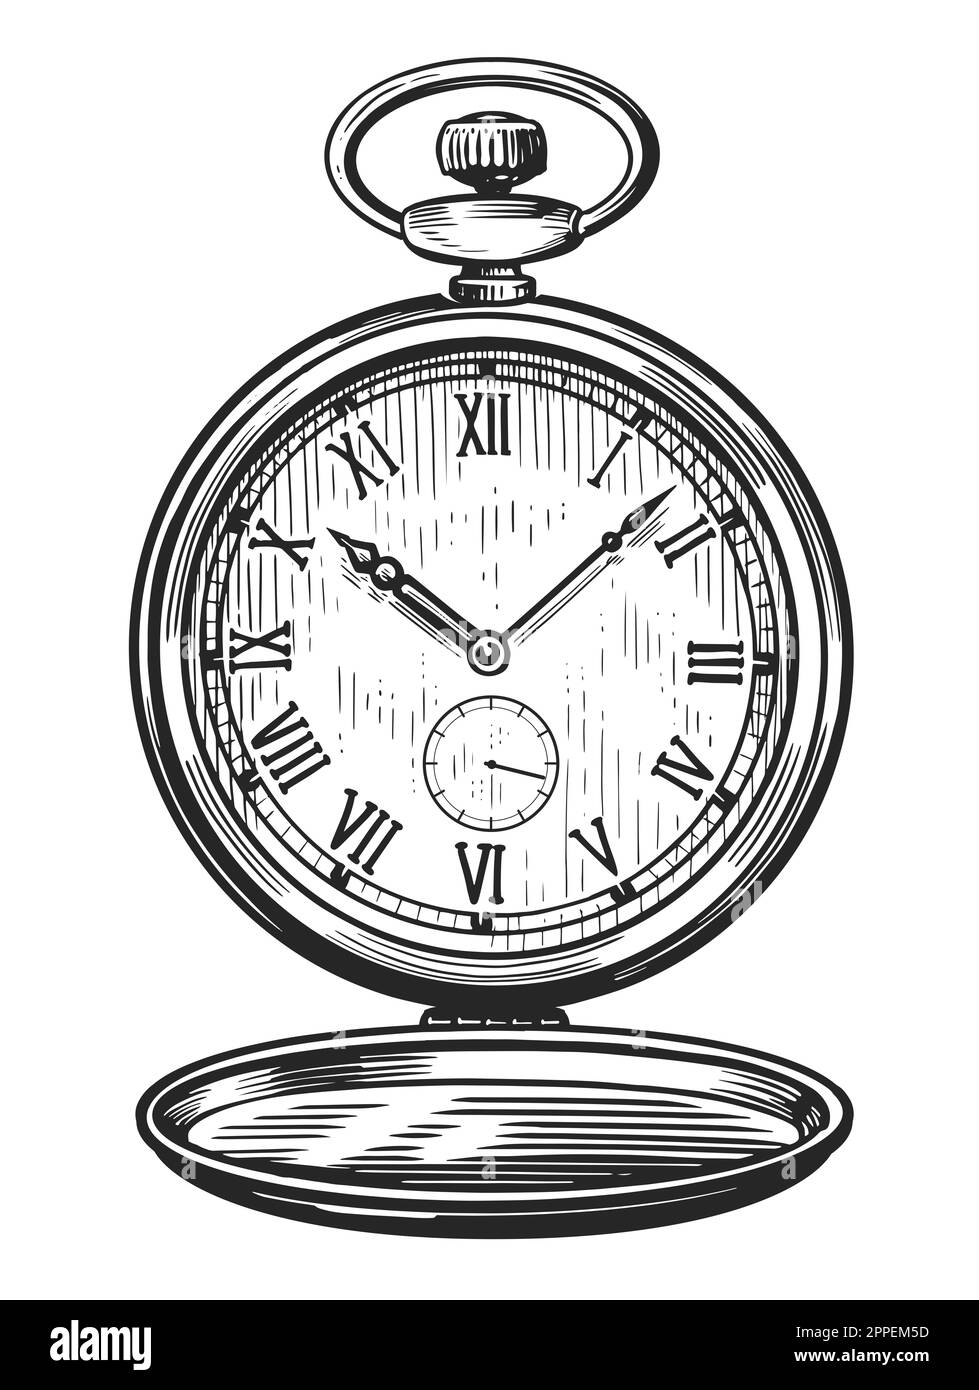 Vintage pocket watch. Retro old clock isolated. Hand drawn sketch illustration in engraving style Stock Photo